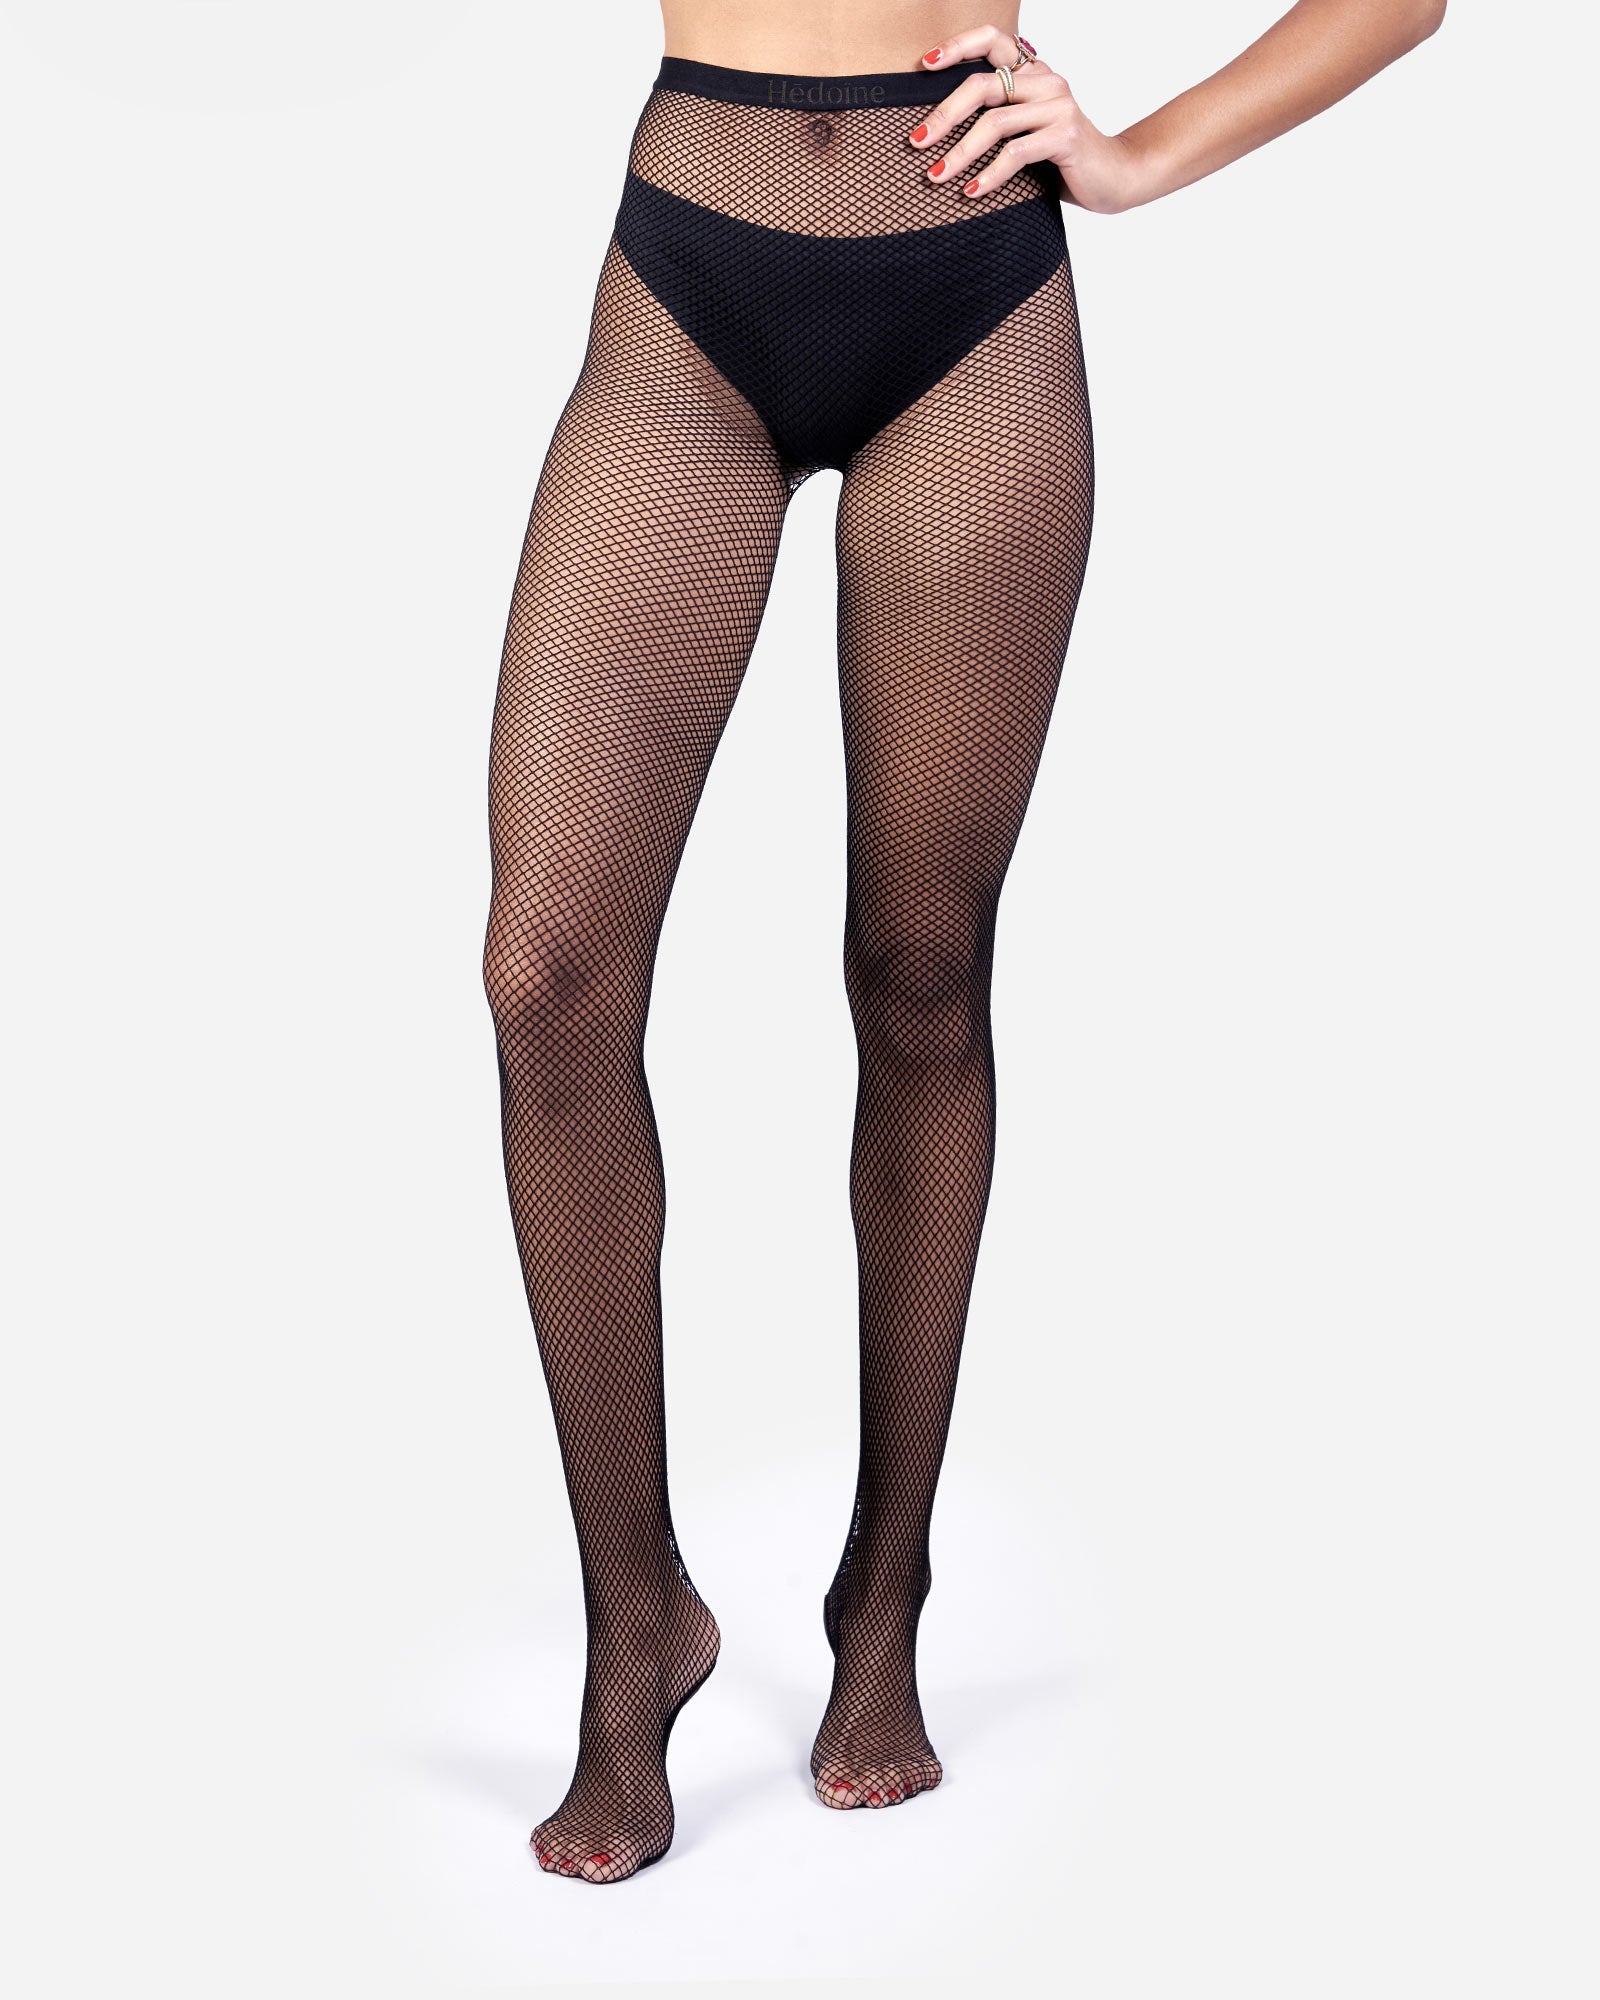 Hedoine The Drama | Fishnet Tights Black * Sustainable Hosiery supplied by Hedoine GBP32.00